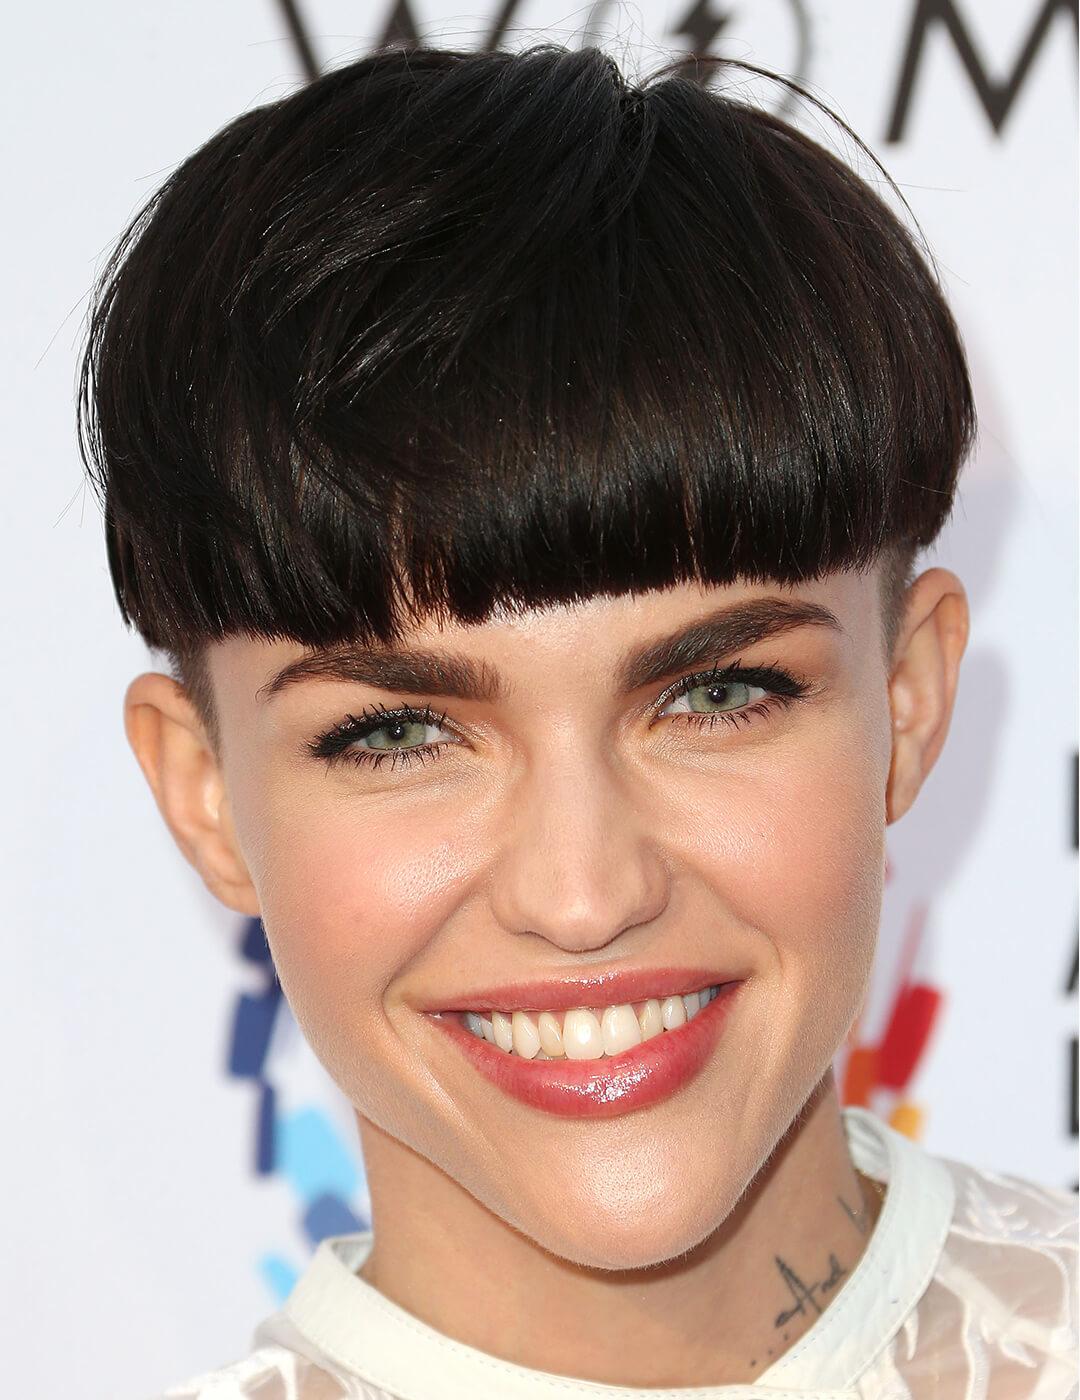 Ruby Rose smiling and rocking a blunt bowl undercut hairstyle on the red carpet